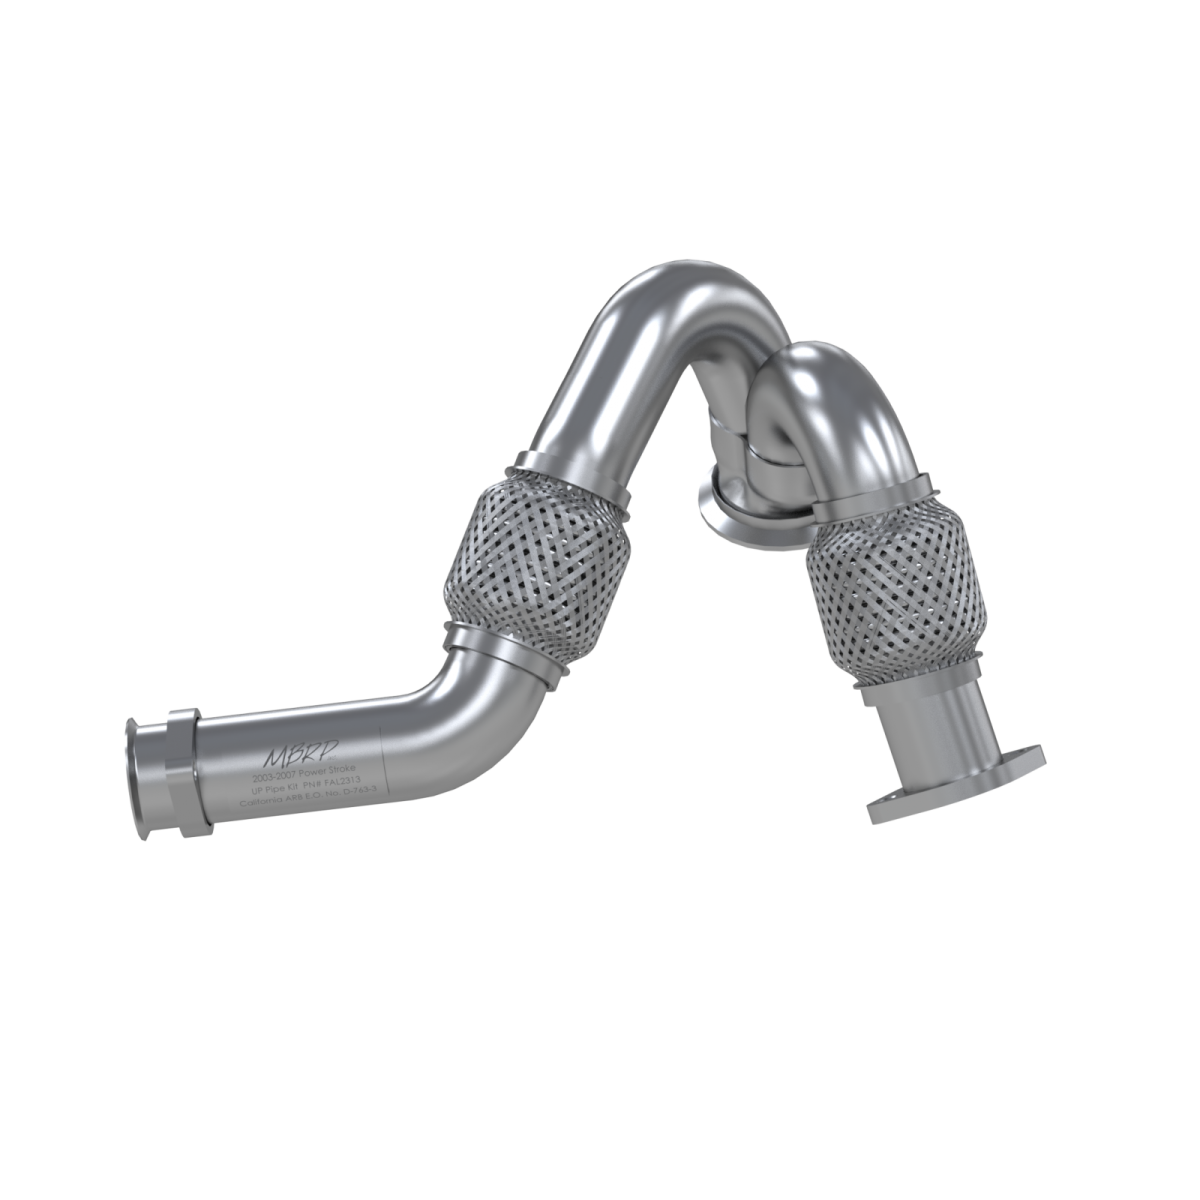 MBRP - MBRP Turbo Exhaust Up-Pipe Dual For 03-07 Ford 6.0L Powerstroke Aluminized Steel Carb EO Num. D-763-3 For 03-07 Ford 6.0L Powerstroke FAL2313